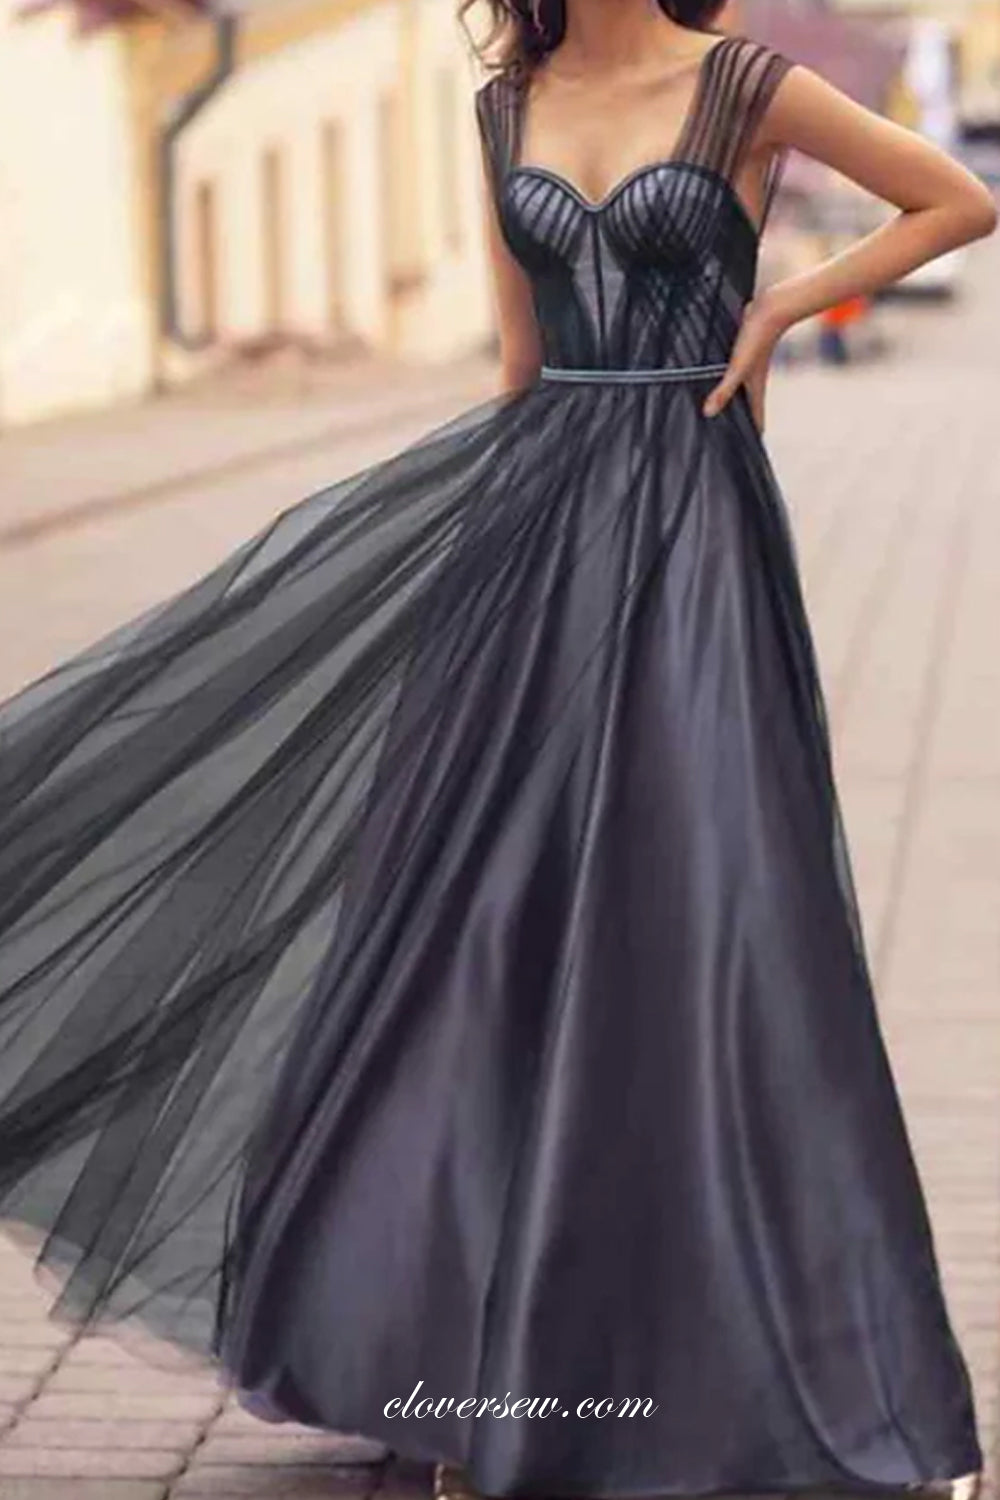 Black Tulle Pleating Sleeveless Sweetheart A-line Fashion Dresses, CP0728